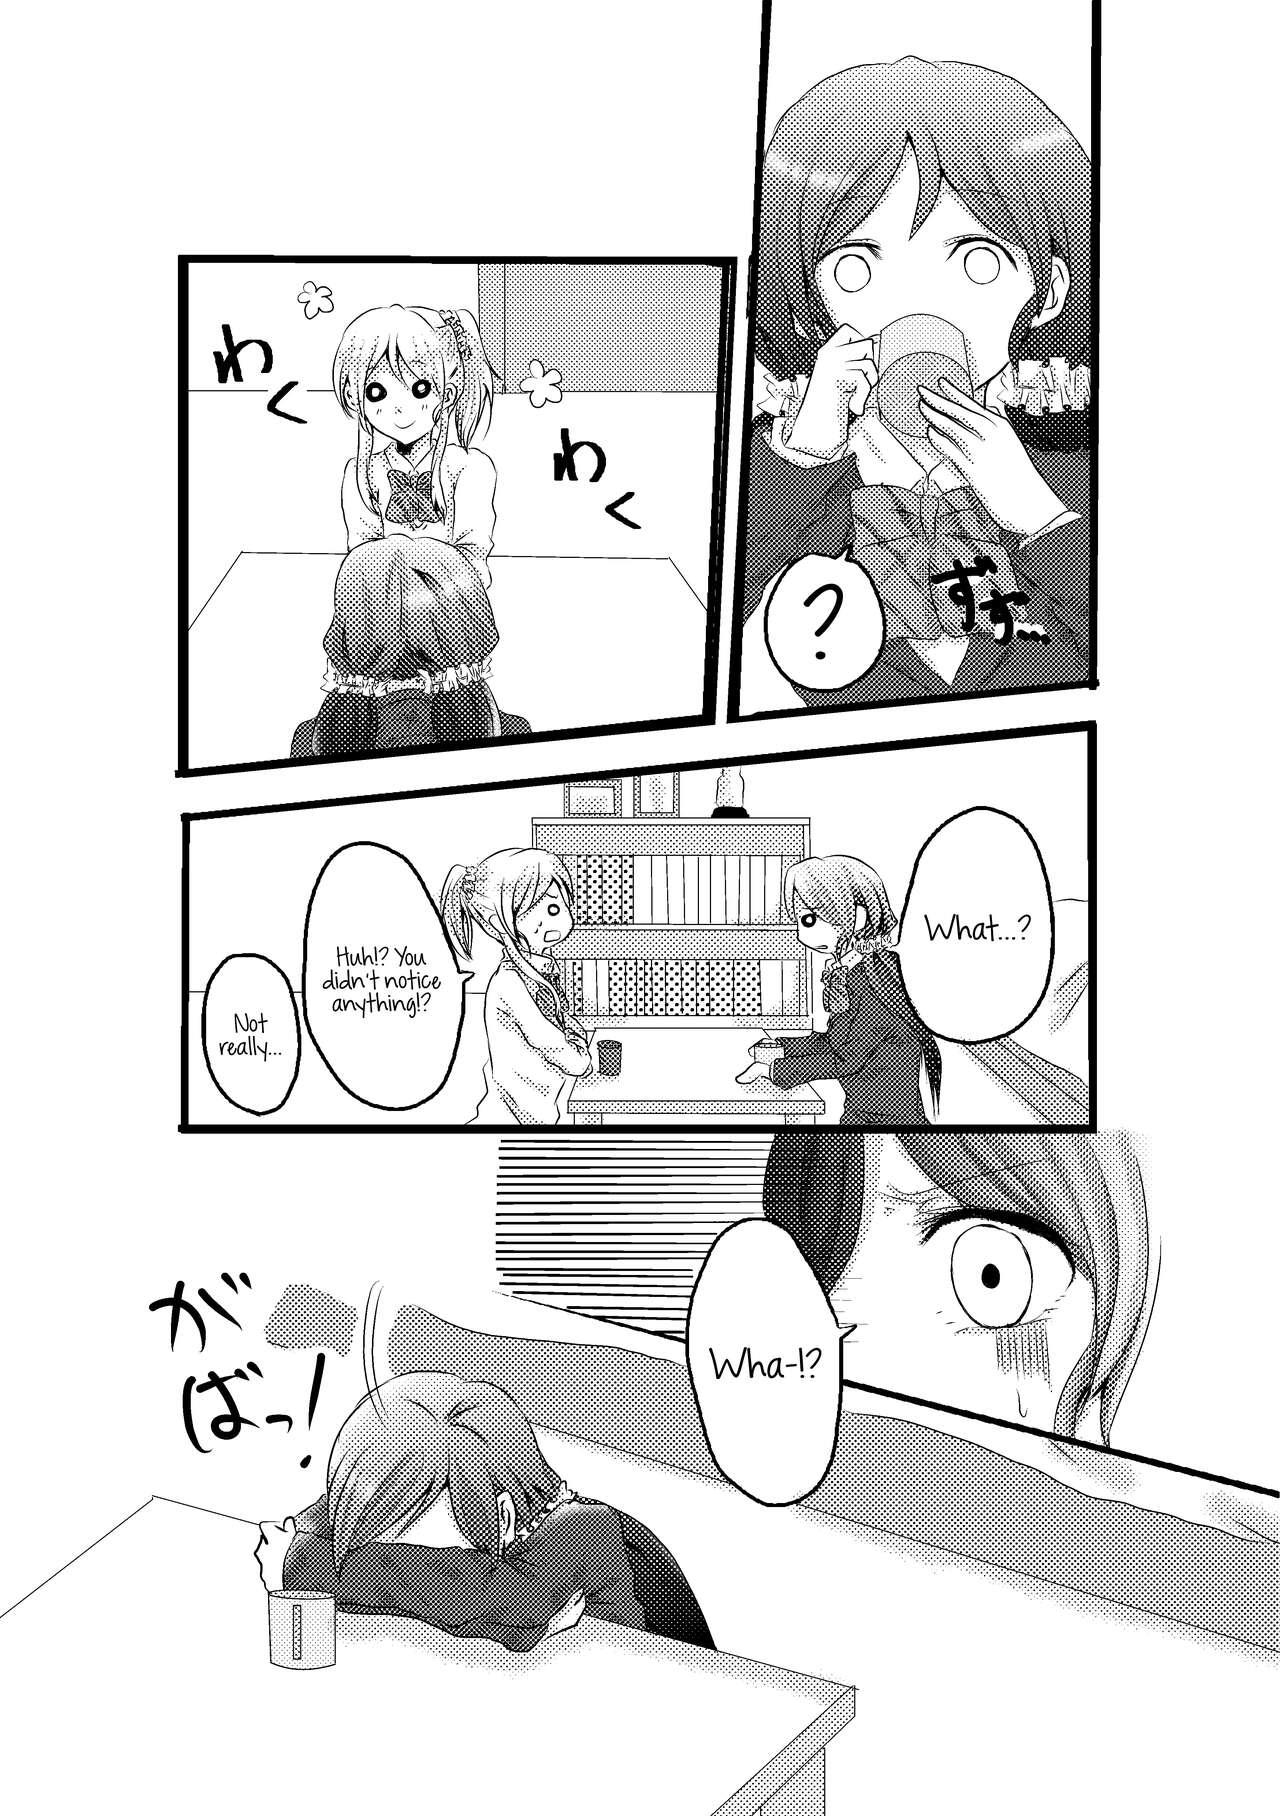 Naked [Inugoya (Toshiko)] A story about mischievous Eli-chan and Nozomi-chan (Umi no Shinwa) (Love Live!) [English] [Usr32] [Digital] - Love live Butt - Page 2